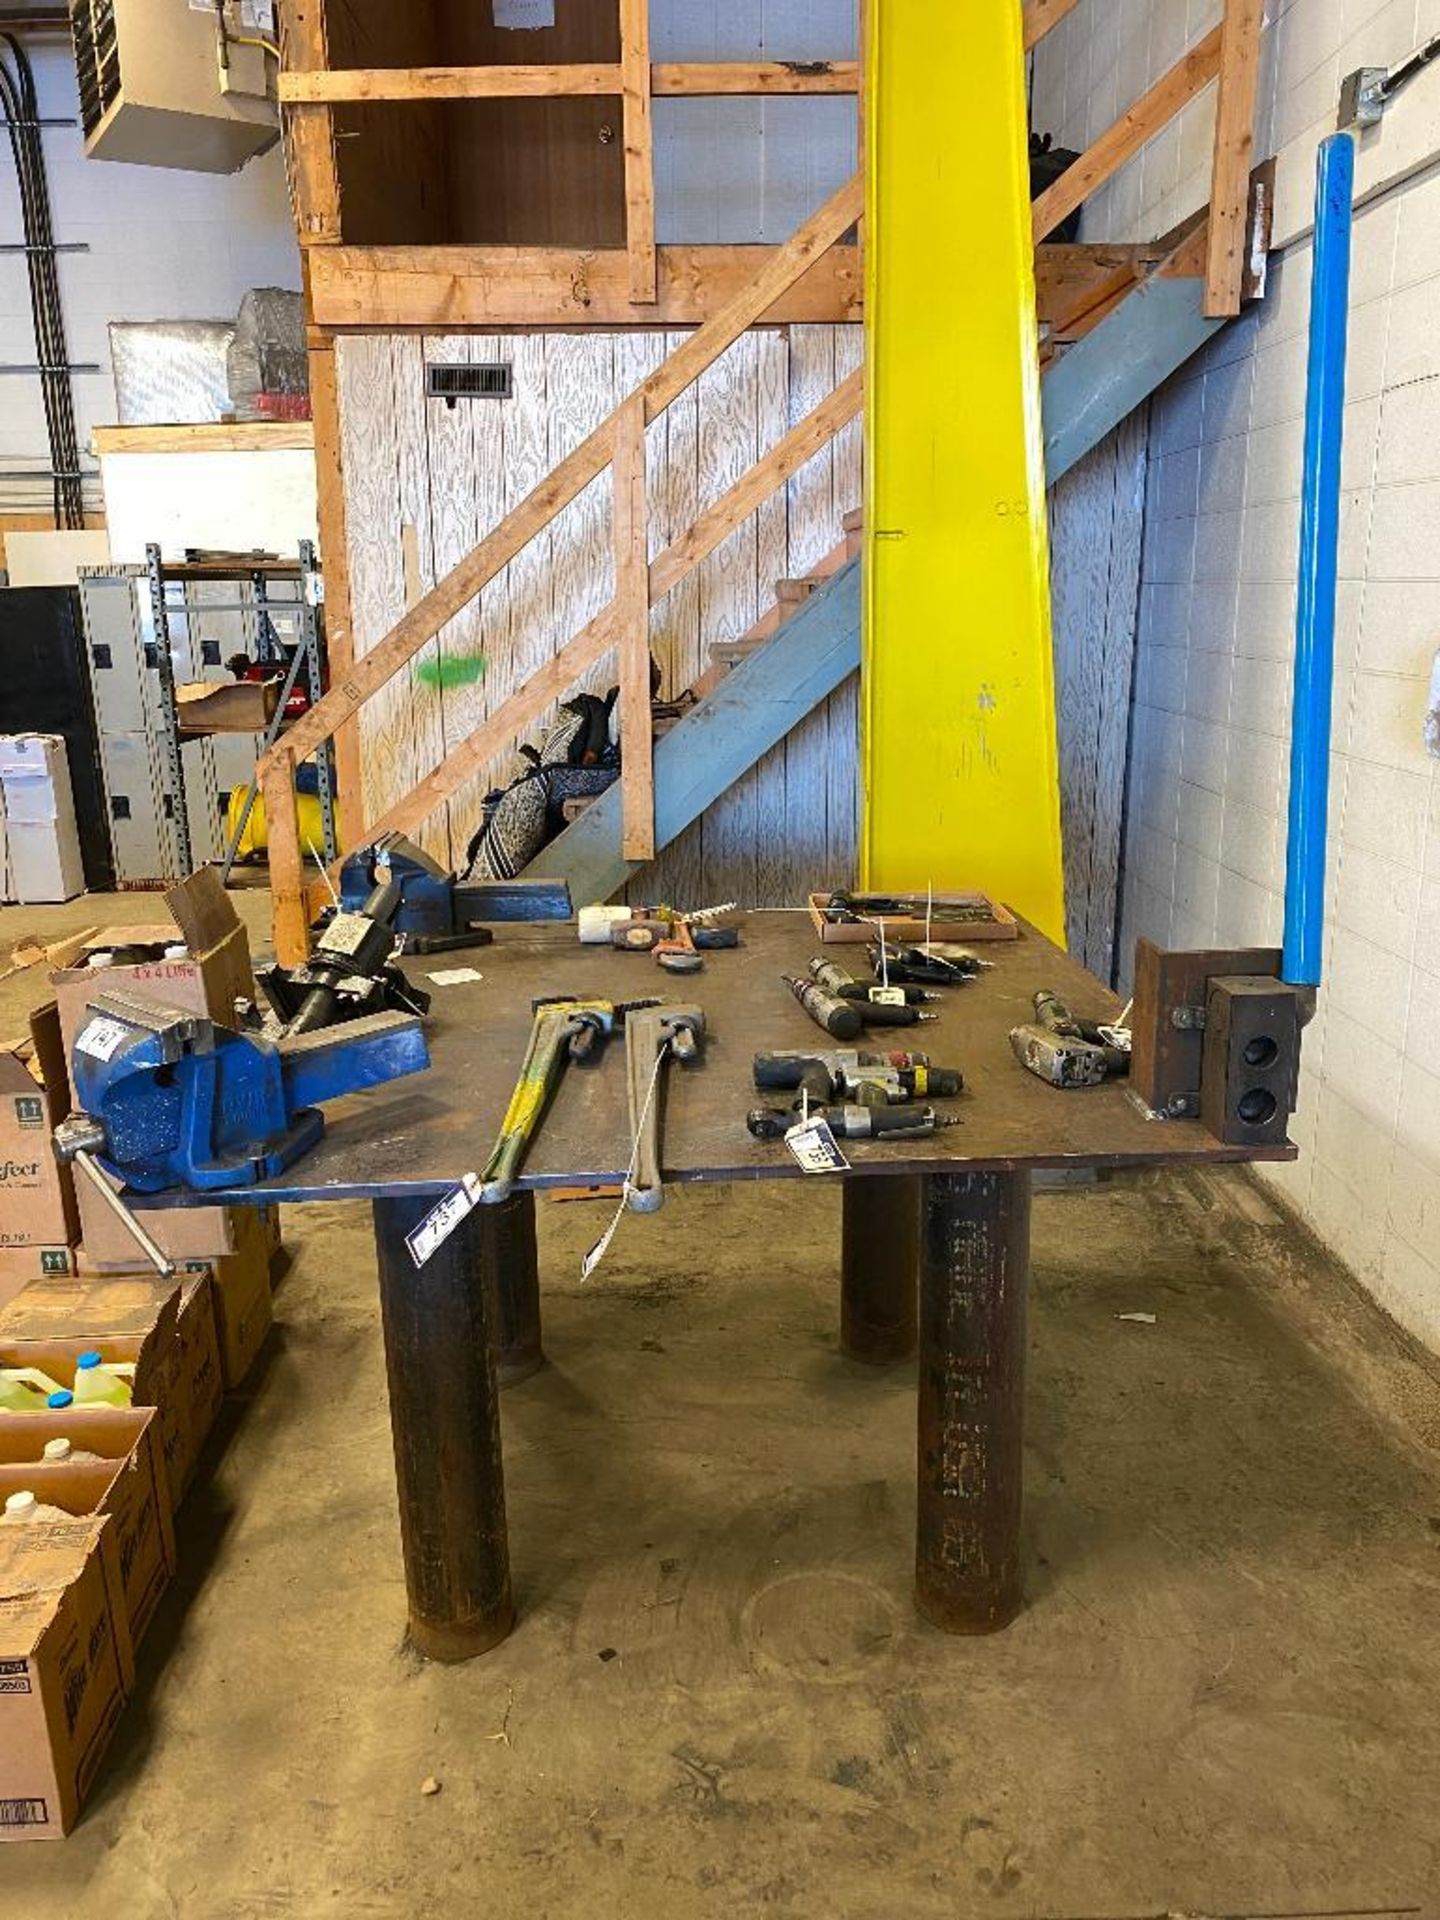 60" X 60" Steel Welding Table w/ Irwin Record 8" Bench Vise and Almi Pipe Notcher - Image 2 of 5